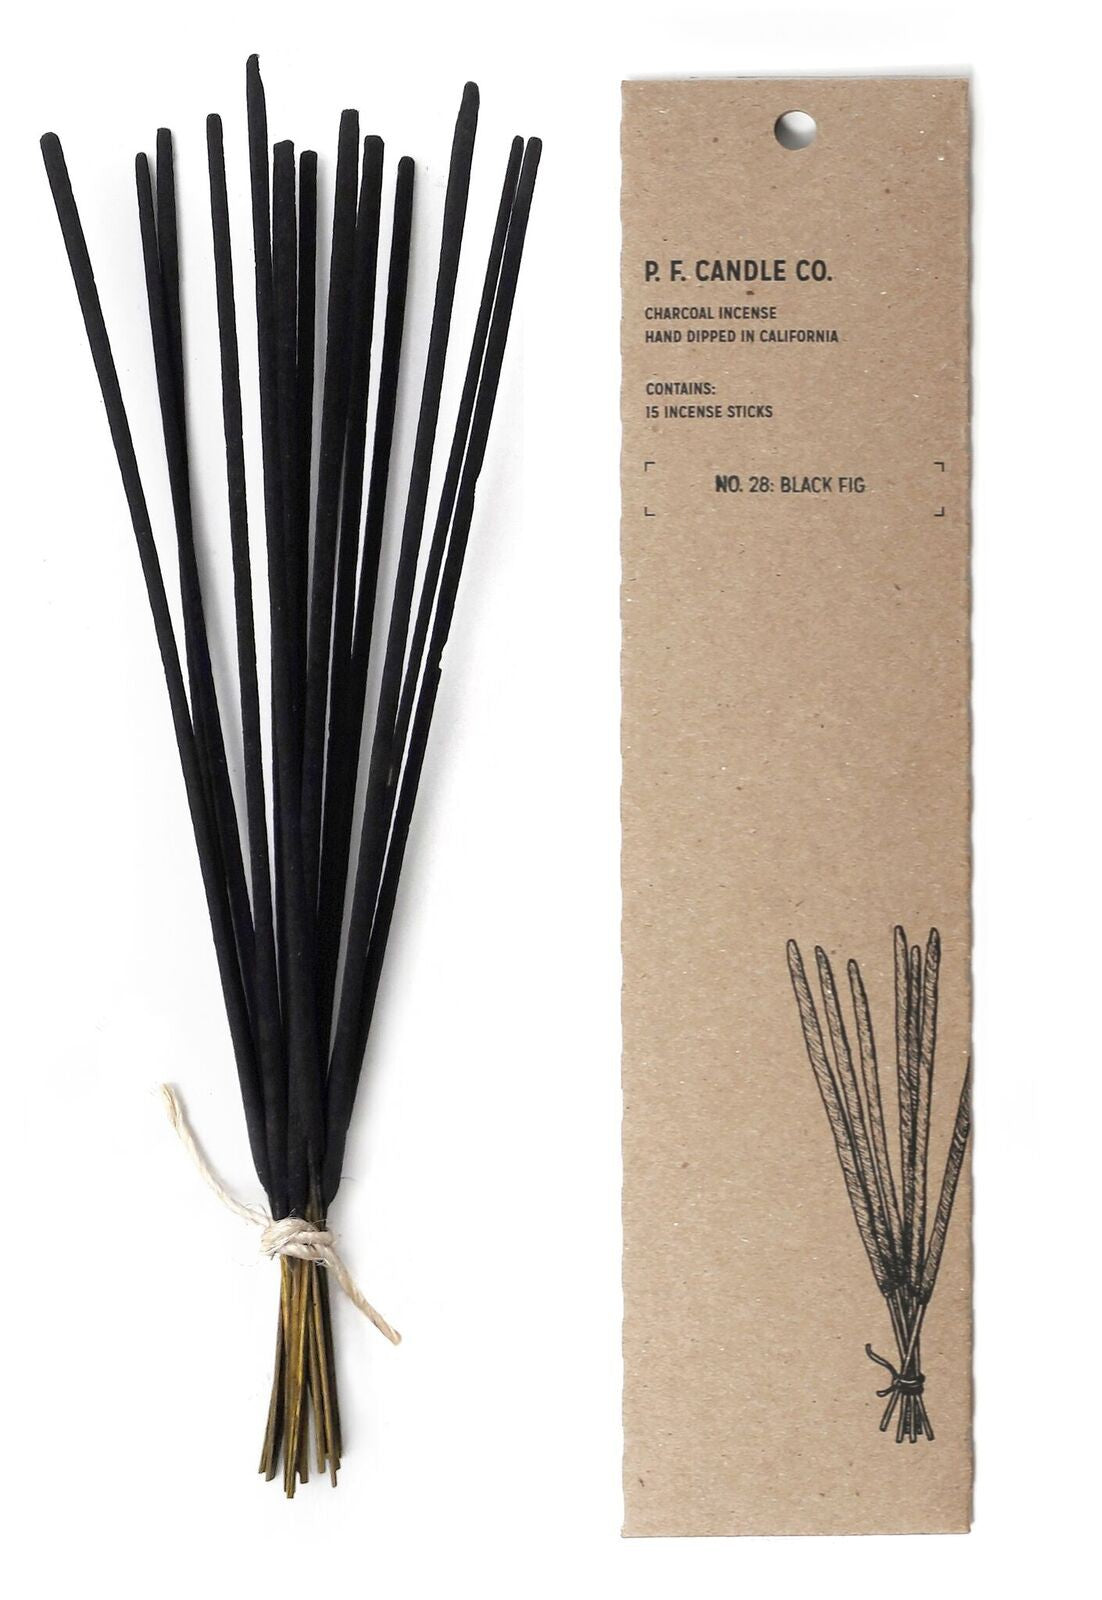 PF Candle Co. Charcoal Incense